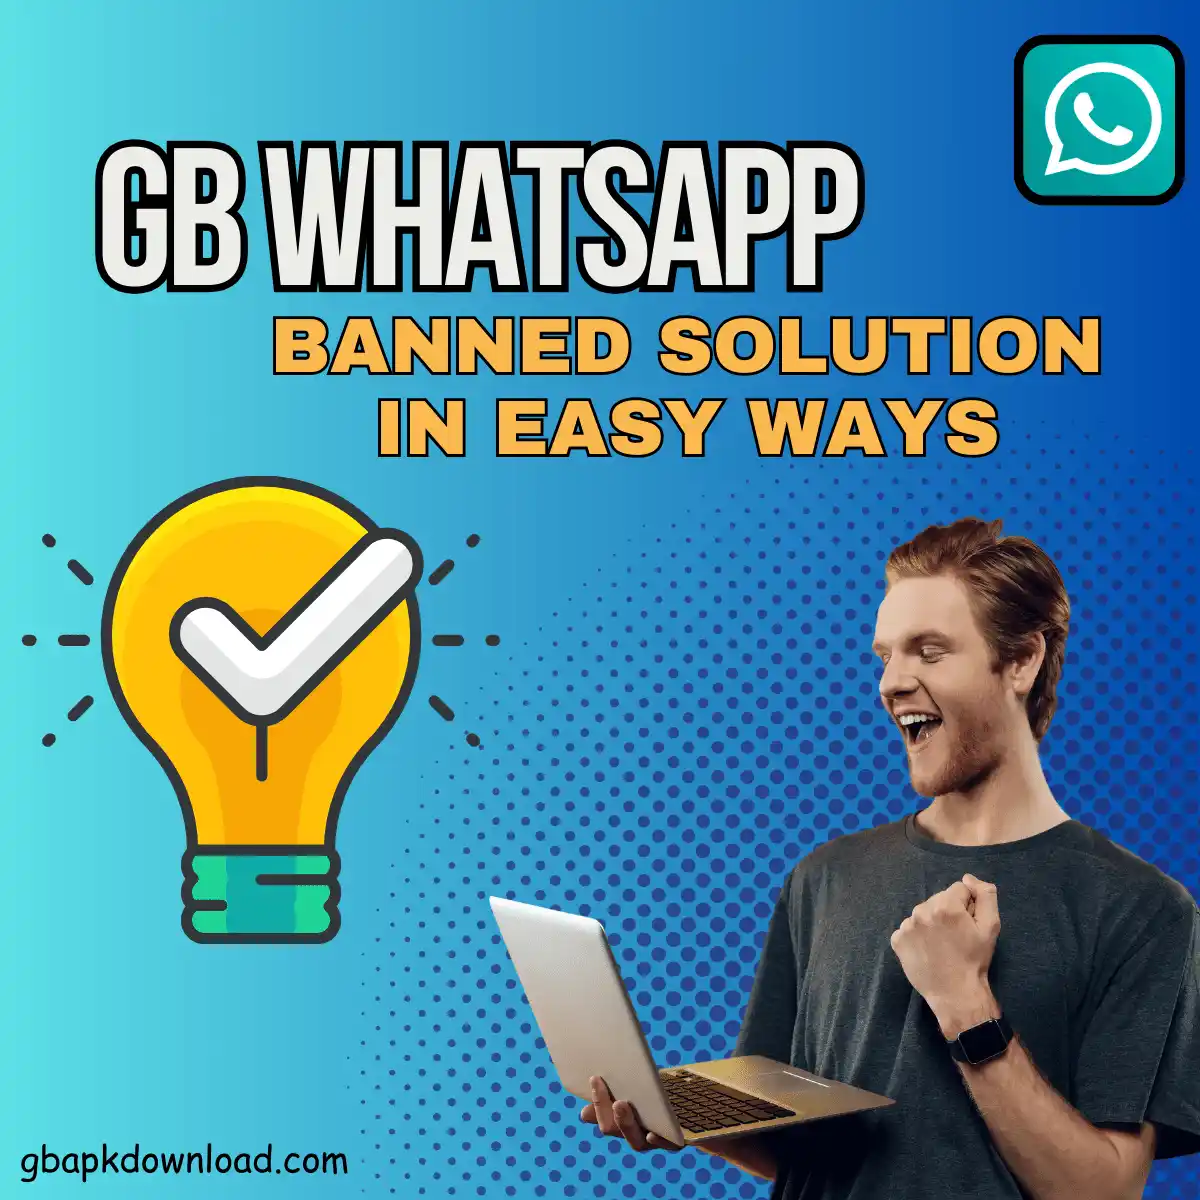 GB WhatsApp banned solution in easy ways